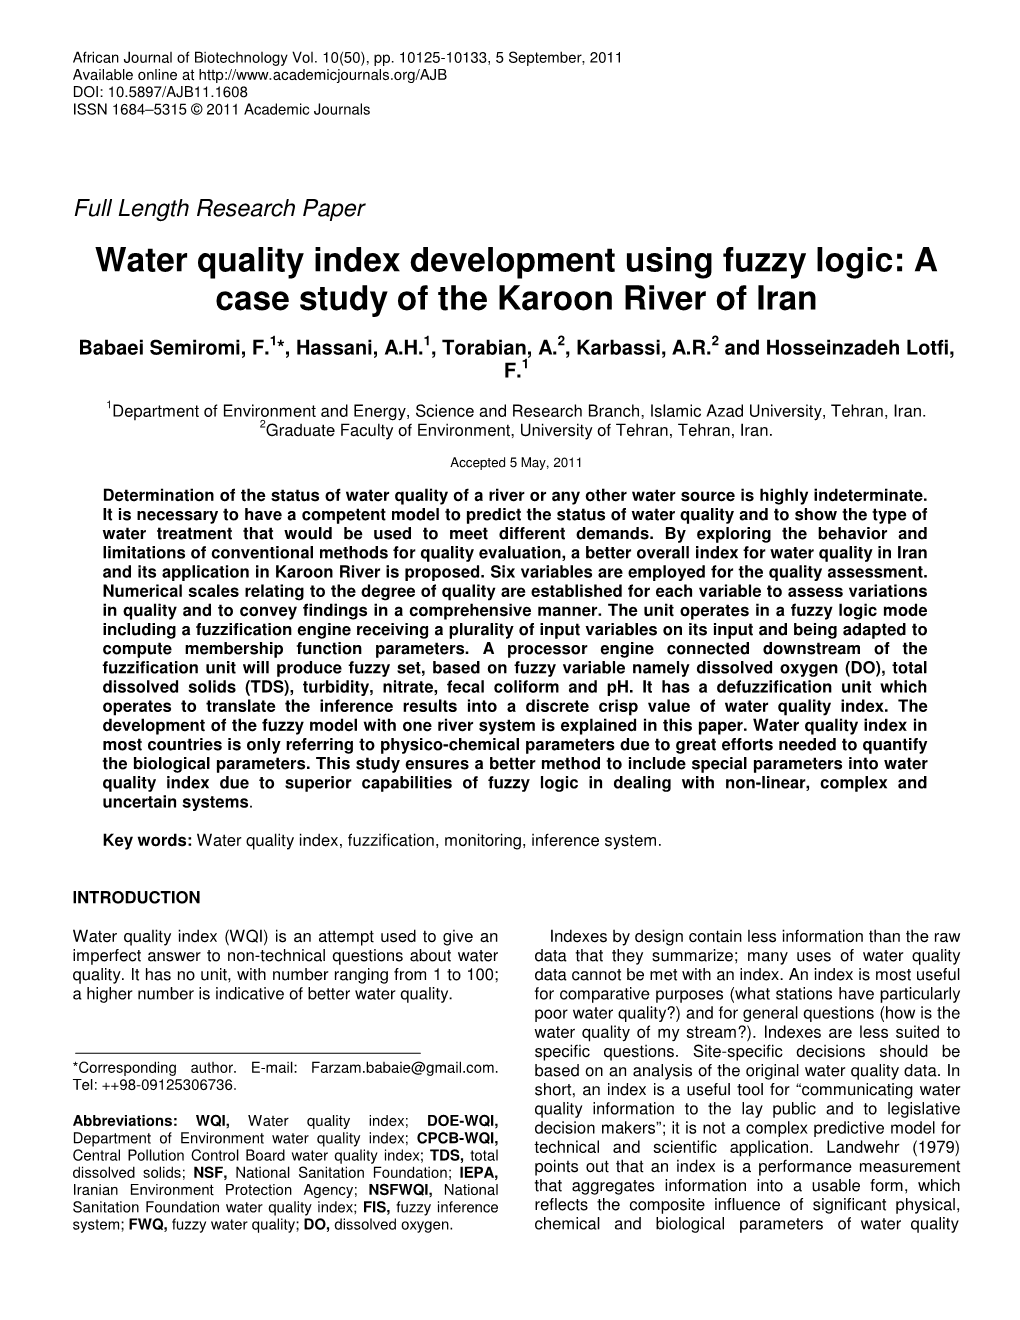 Water Quality Index Development Using Fuzzy Logic: a Case Study of the Karoon River of Iran